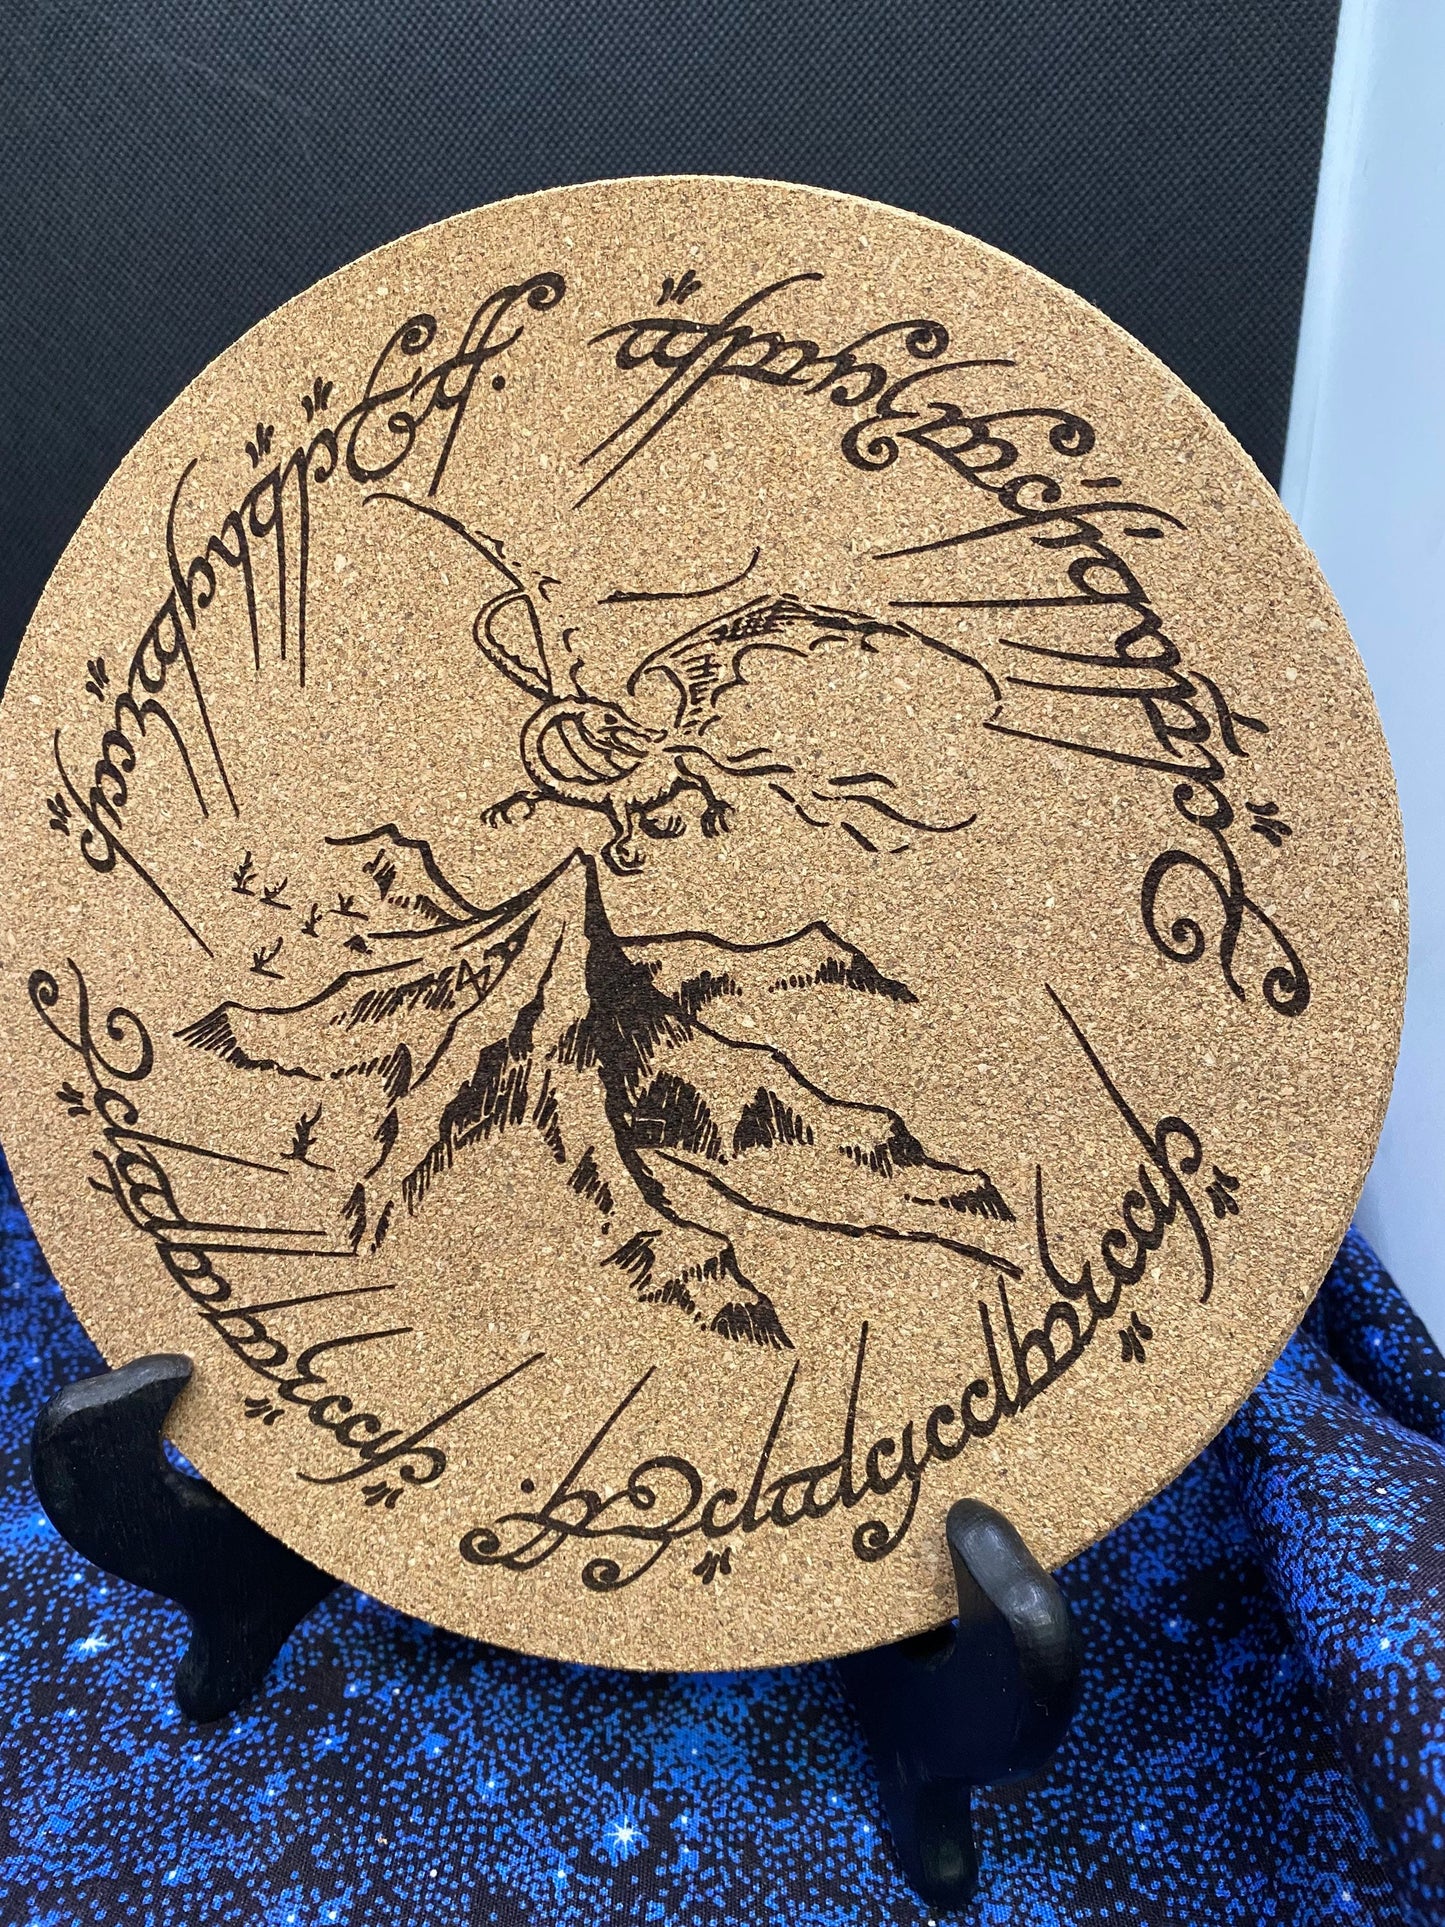 Lord of the Rings Smaug Cork Trivet/Board